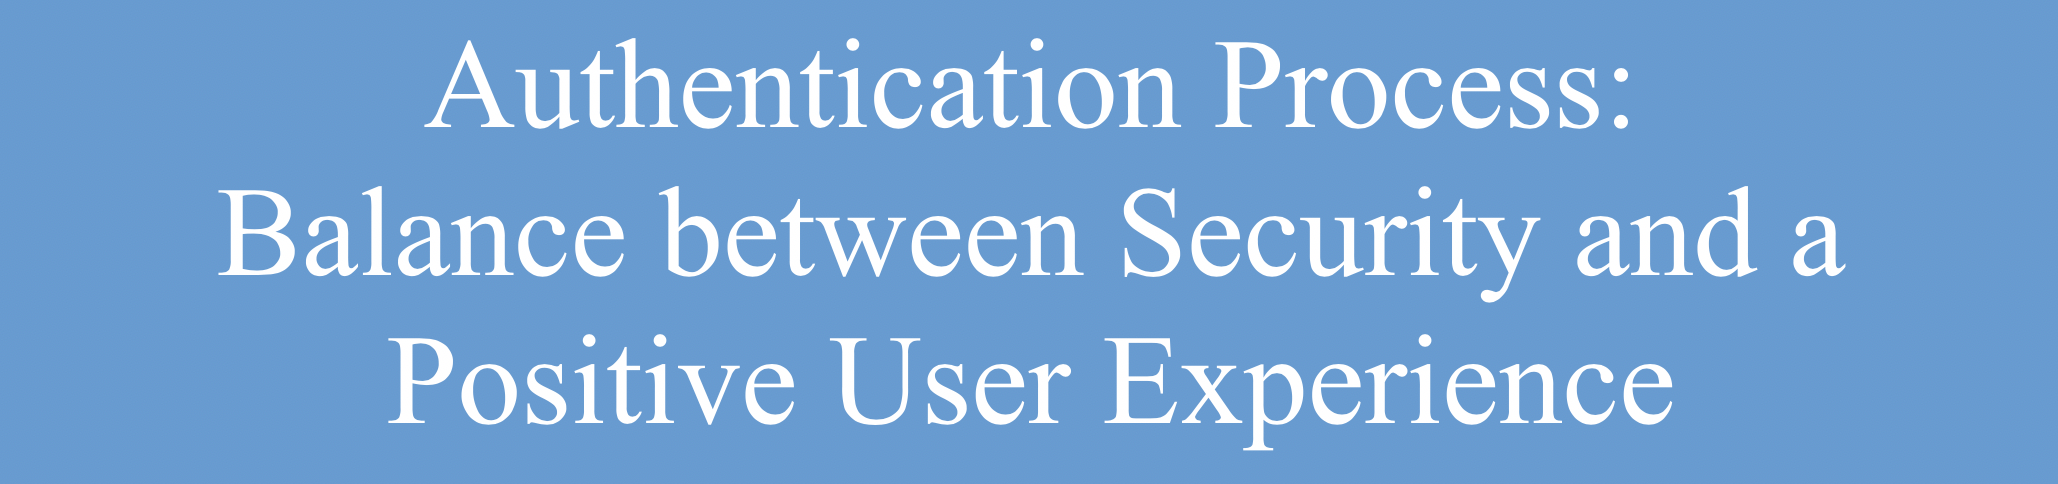 Authentication Process Balance between Security and a Positive User Experience